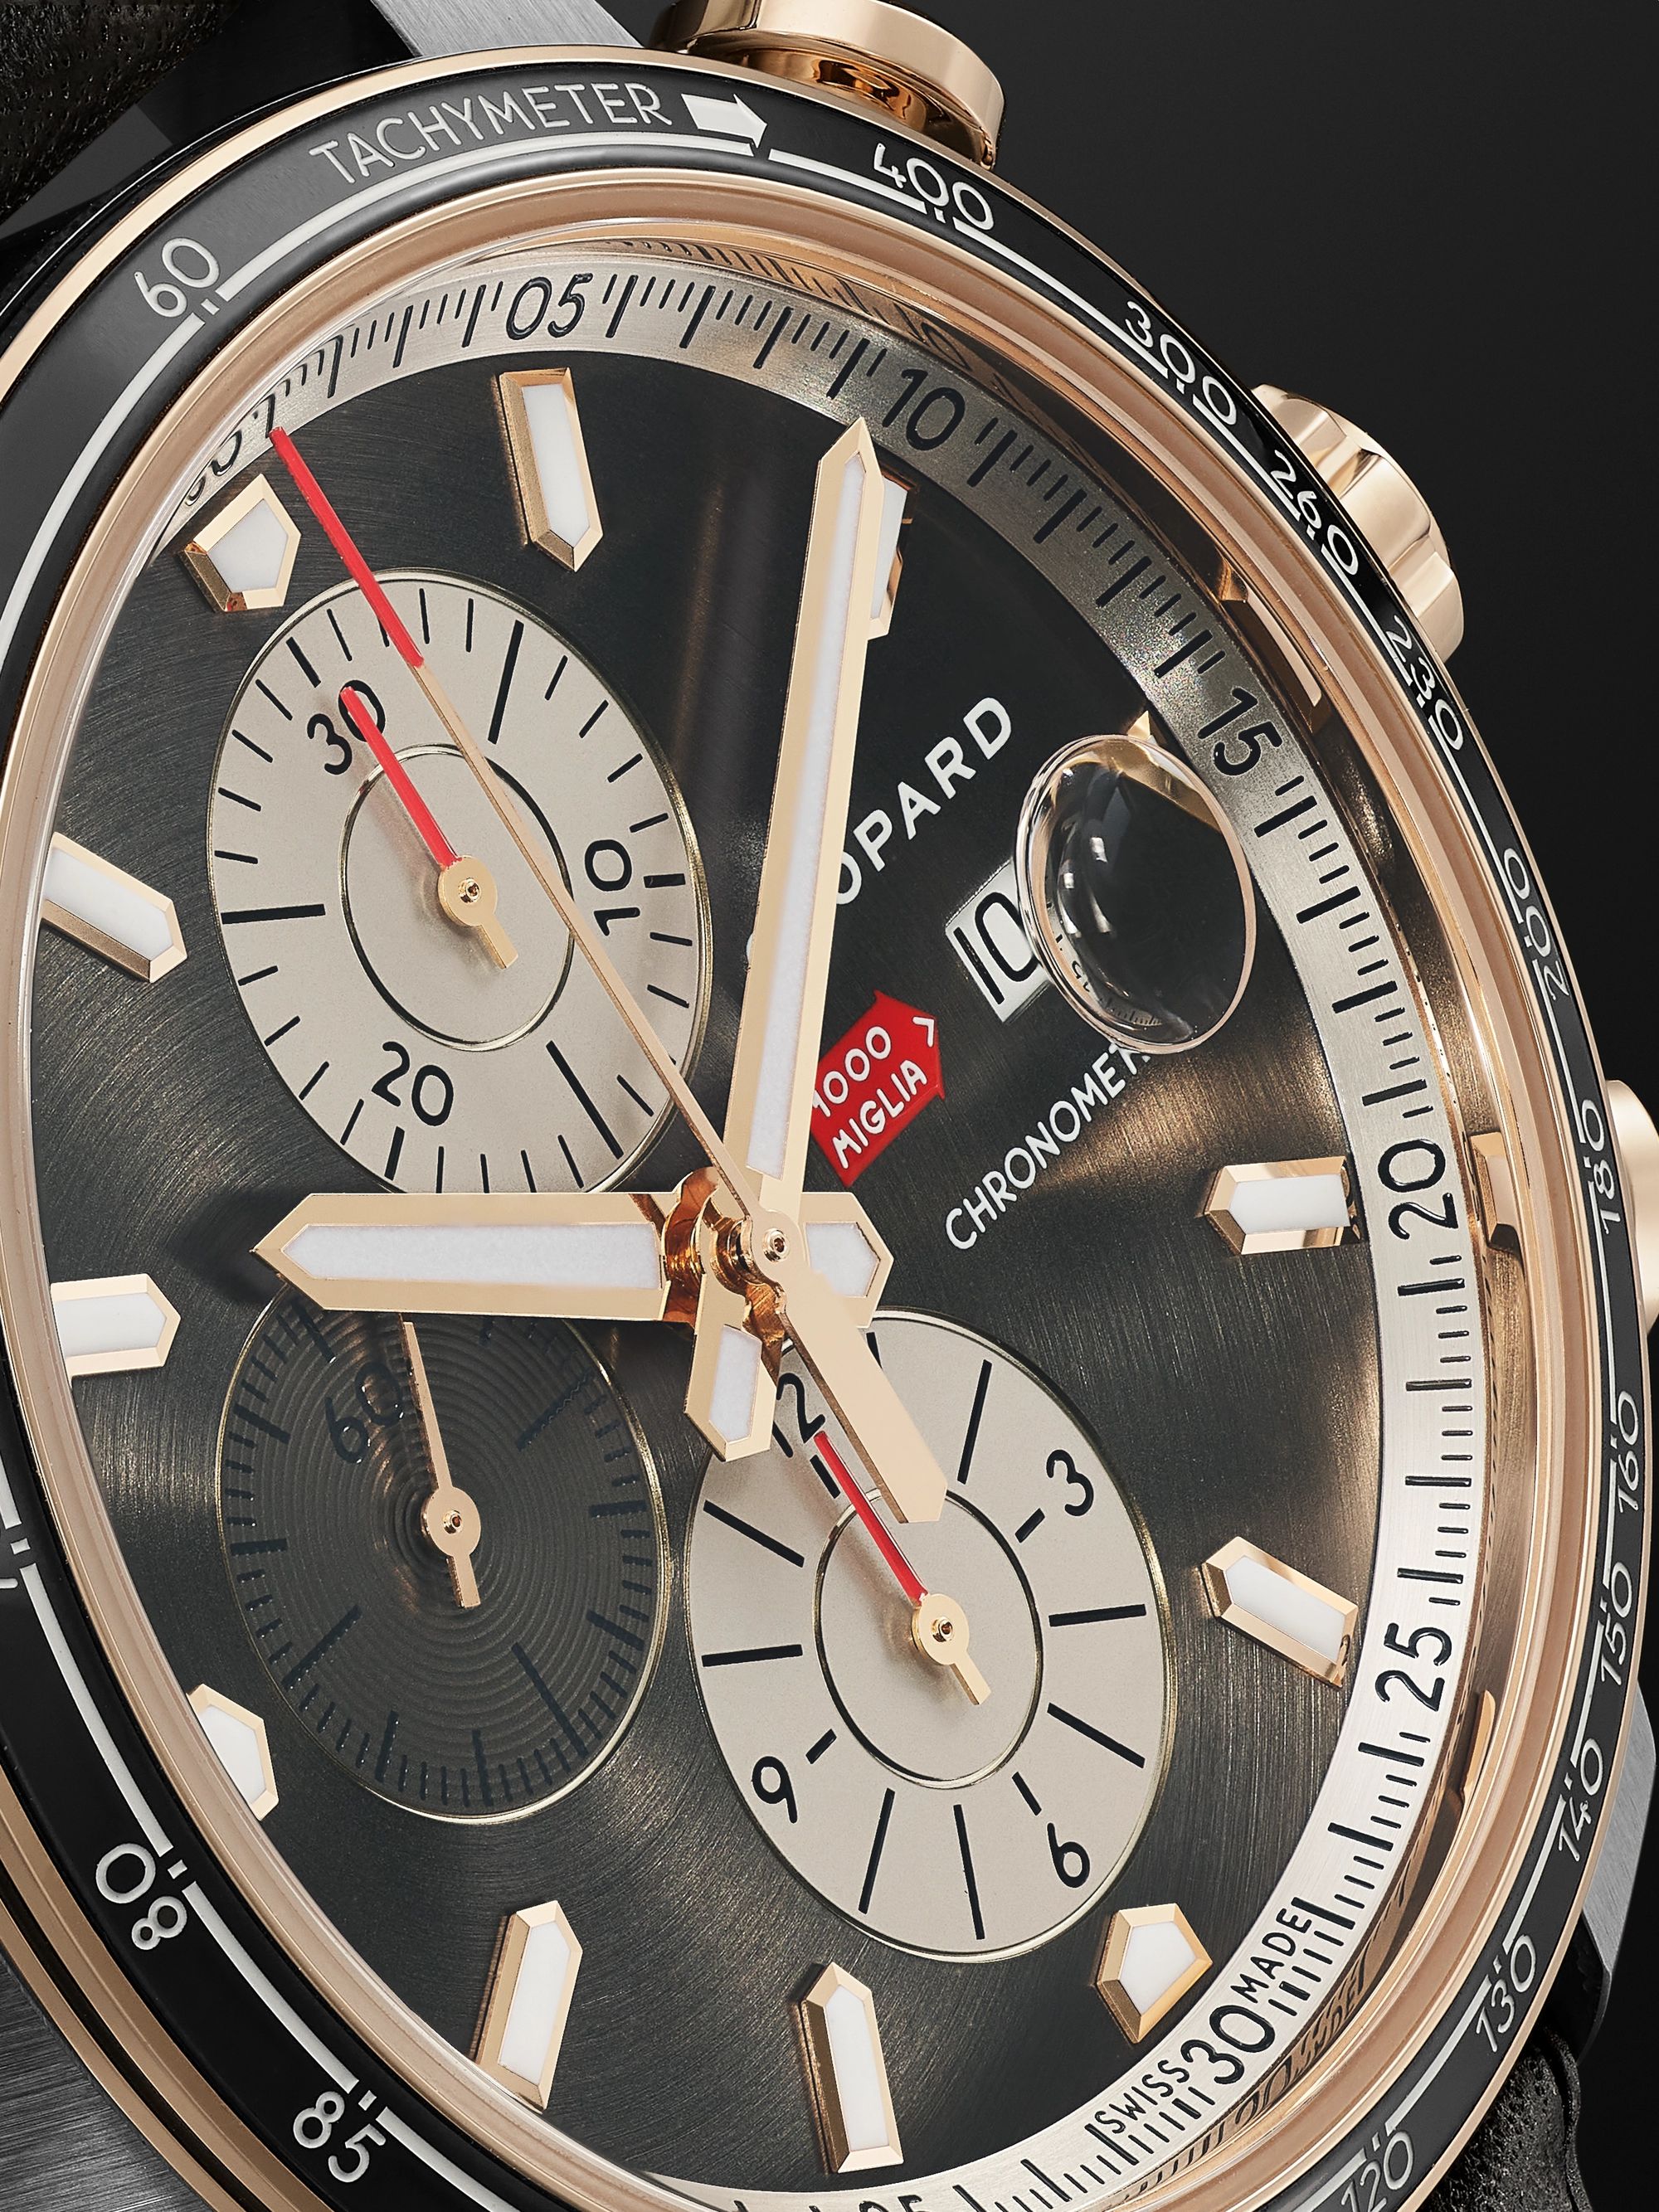 CHOPARD Mille Miglia 2021 Race Edition Limited Edition Automatic Chronograph 44mm Stainless Steel, 18-Karat Rose Gold and Leather Watch, Ref. No. 168589-3028